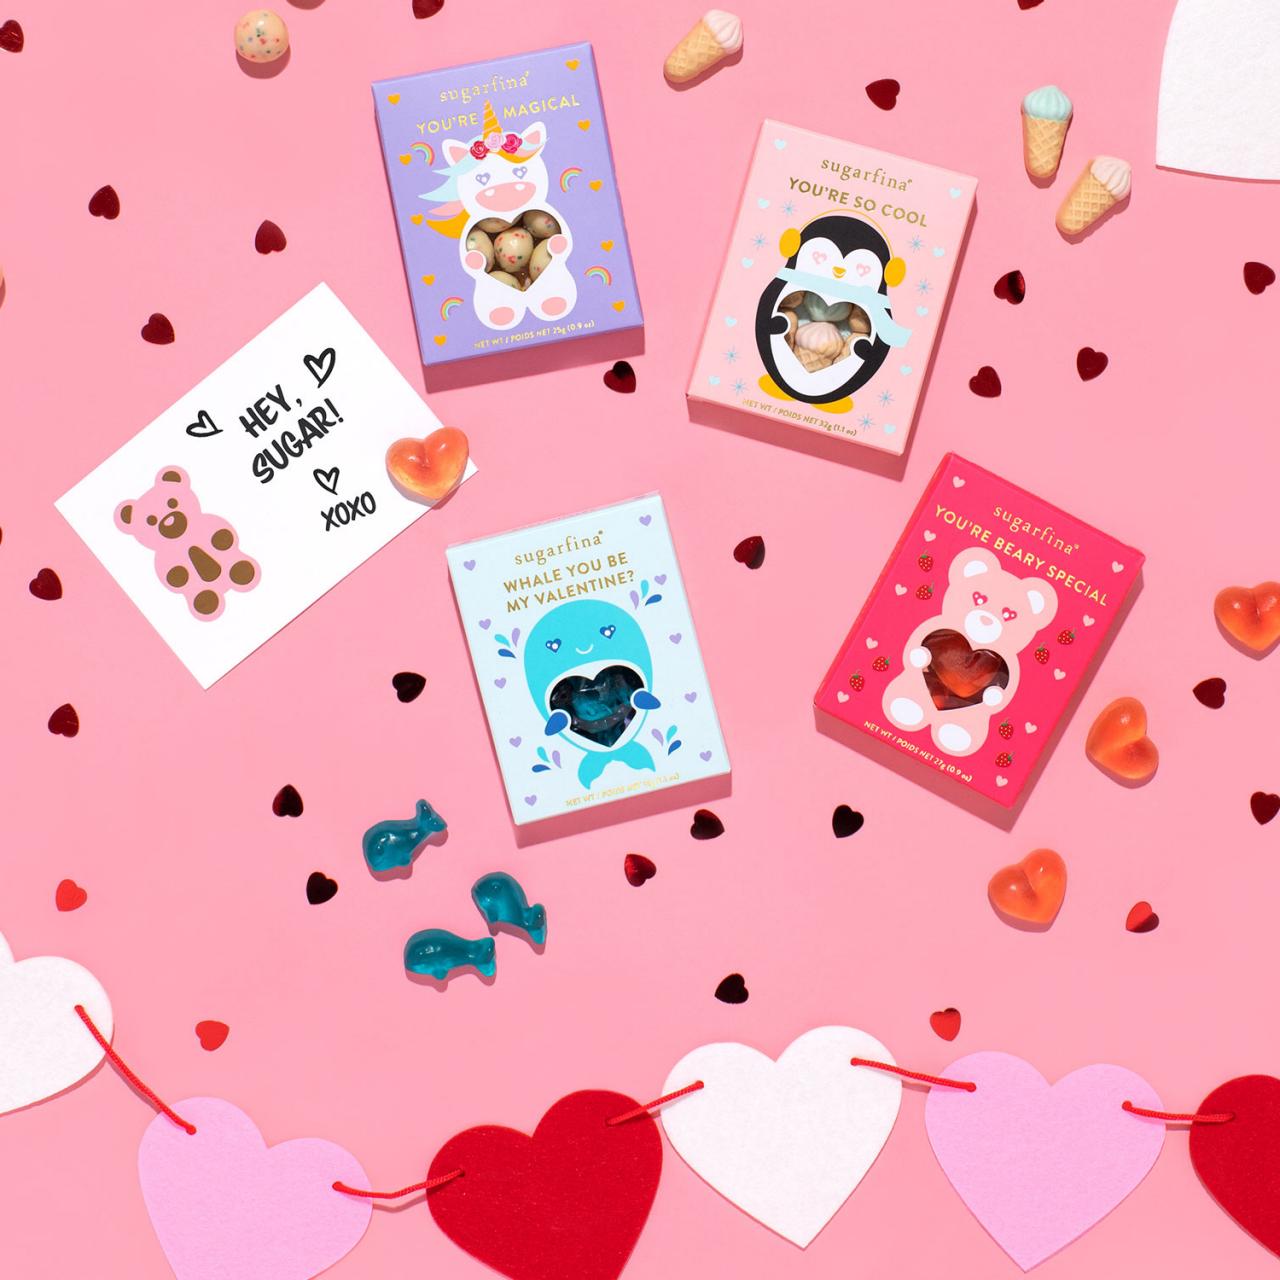 Aside From Food, You're My Favorite, DIY Valentine Card Making Kit